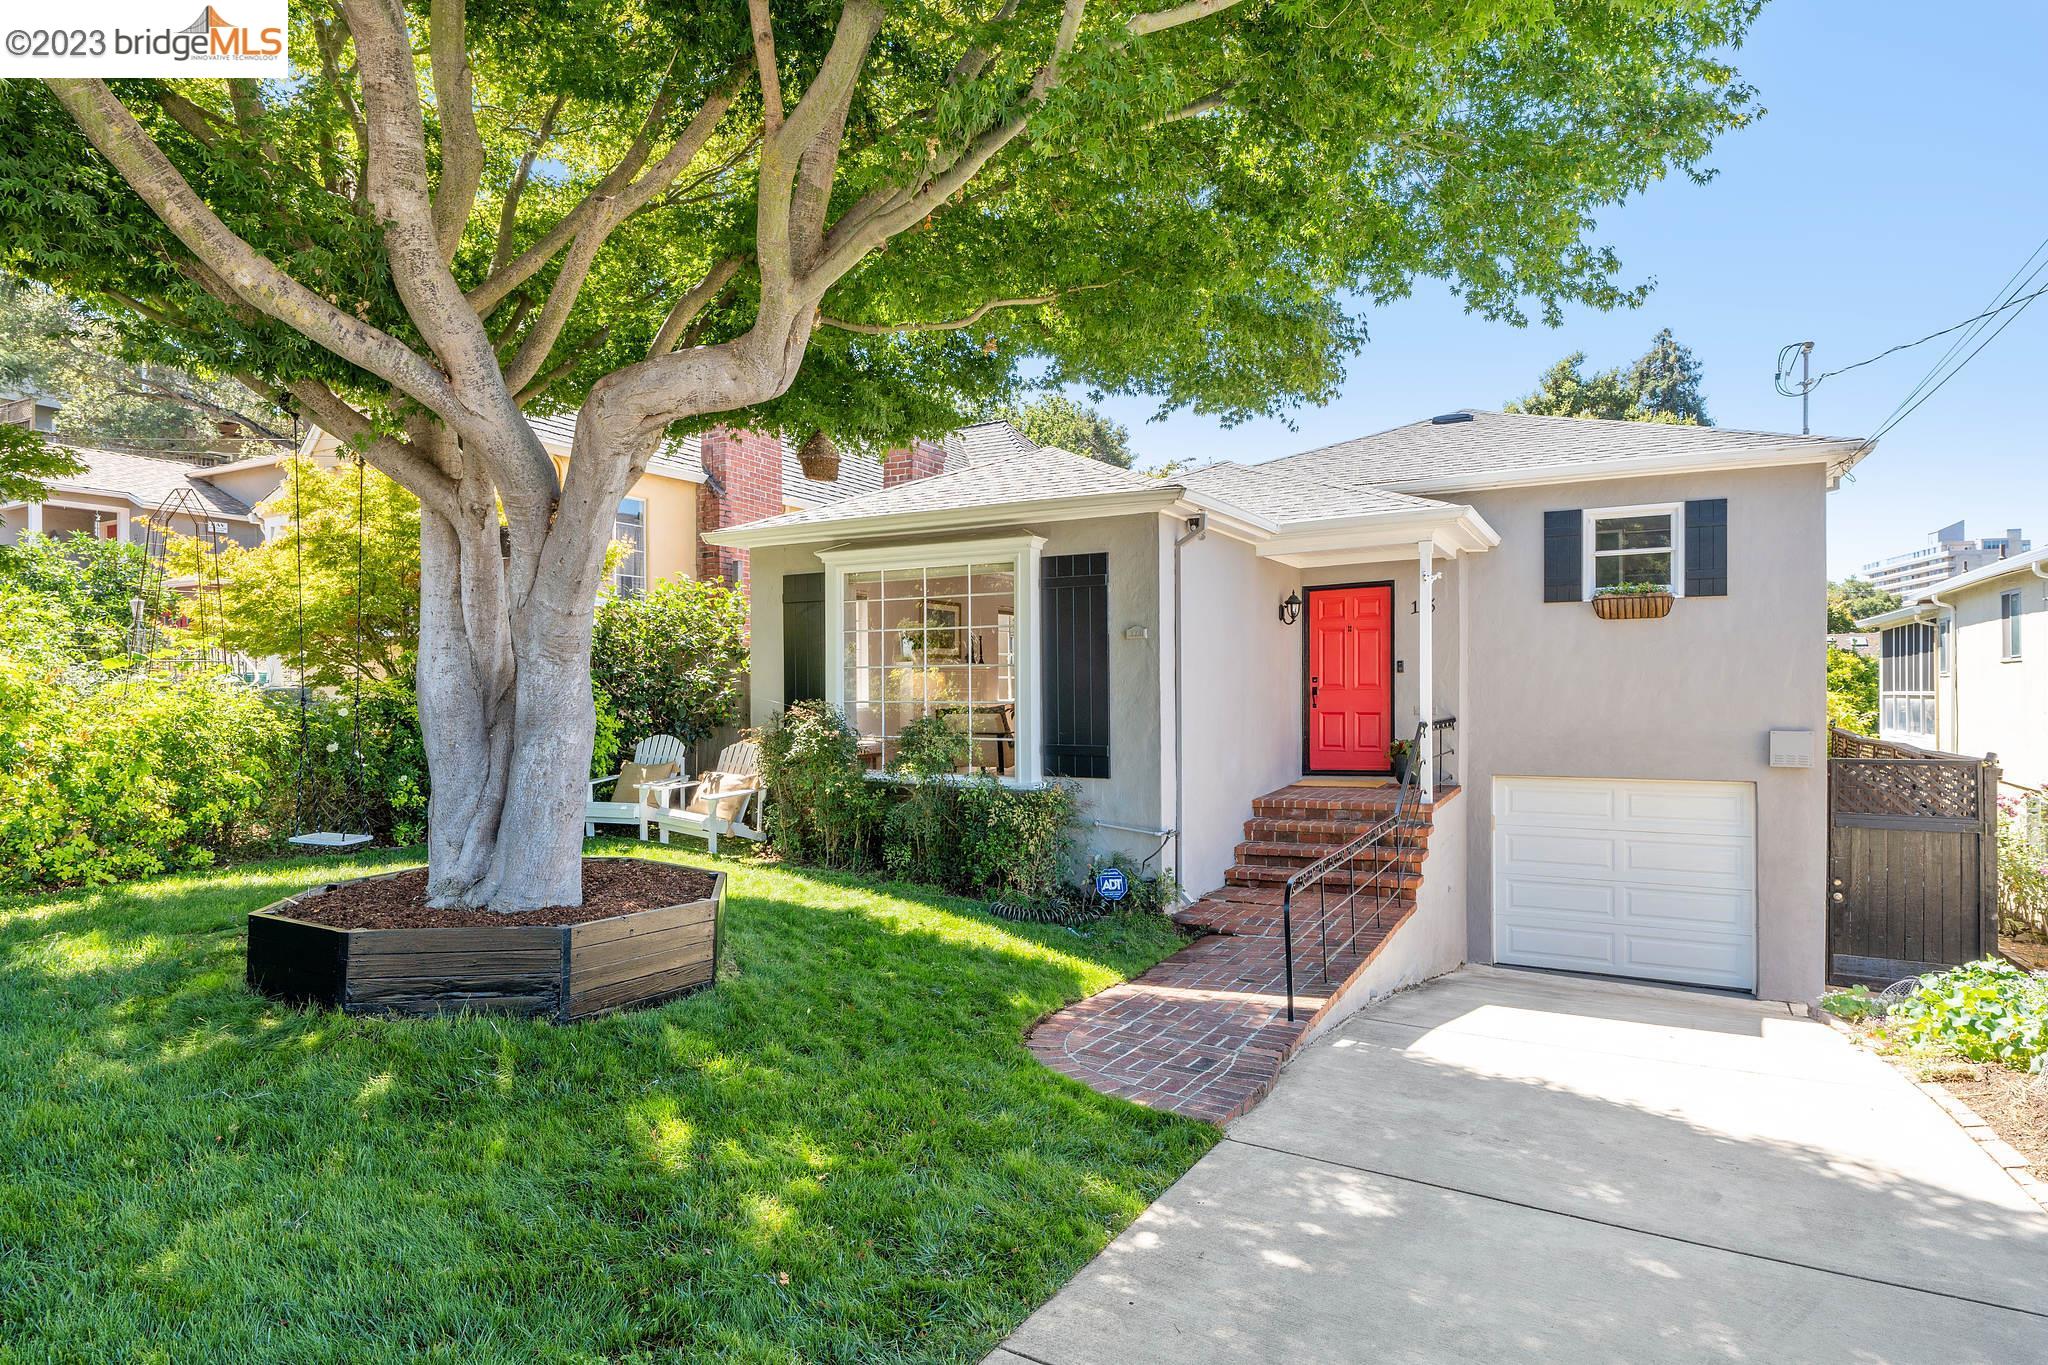 This Piedmont Avenue split-level gem with ample space & comfortable living coaxes you Home! The front lawn encircles a specimen Japanese maple & a special garden bed offers up the perfect spot for homegrown veggies galore. The freshly painted 4 BR/3 BA interior gives everyone a place to be. The main level welcomes family & friends to the expansive living room, a spot for memorable meals in the dining room, & a well-appointed kitchen spilling out to a deck & south-facing garden spaces beyond. The upper level contains an alcove in which to do schoolwork, 3 sunny bedrooms, & 2 beautifully remodeled bathrooms one of them en suite. The lower level provides a second primary suite with glass sliders leading out to a patio & lush lawn. A Family Room with a wet bar brings it all together for game night. The garage offers interior access, a laundry space, an EV charger, & access to loads of storage space. Get away to the detached office & immerse yourself in the peace & beauty of the surrounding gardens. With a deck, multiple patios. a lush lawn, & a hot tub, there is truly space for all! At the other end of the road, Piedmont Avenue delights with eateries, enchanting shops & boutiques while practical stores & services line the mile-long avenue. Indeed, what a marvelous place to call Home!